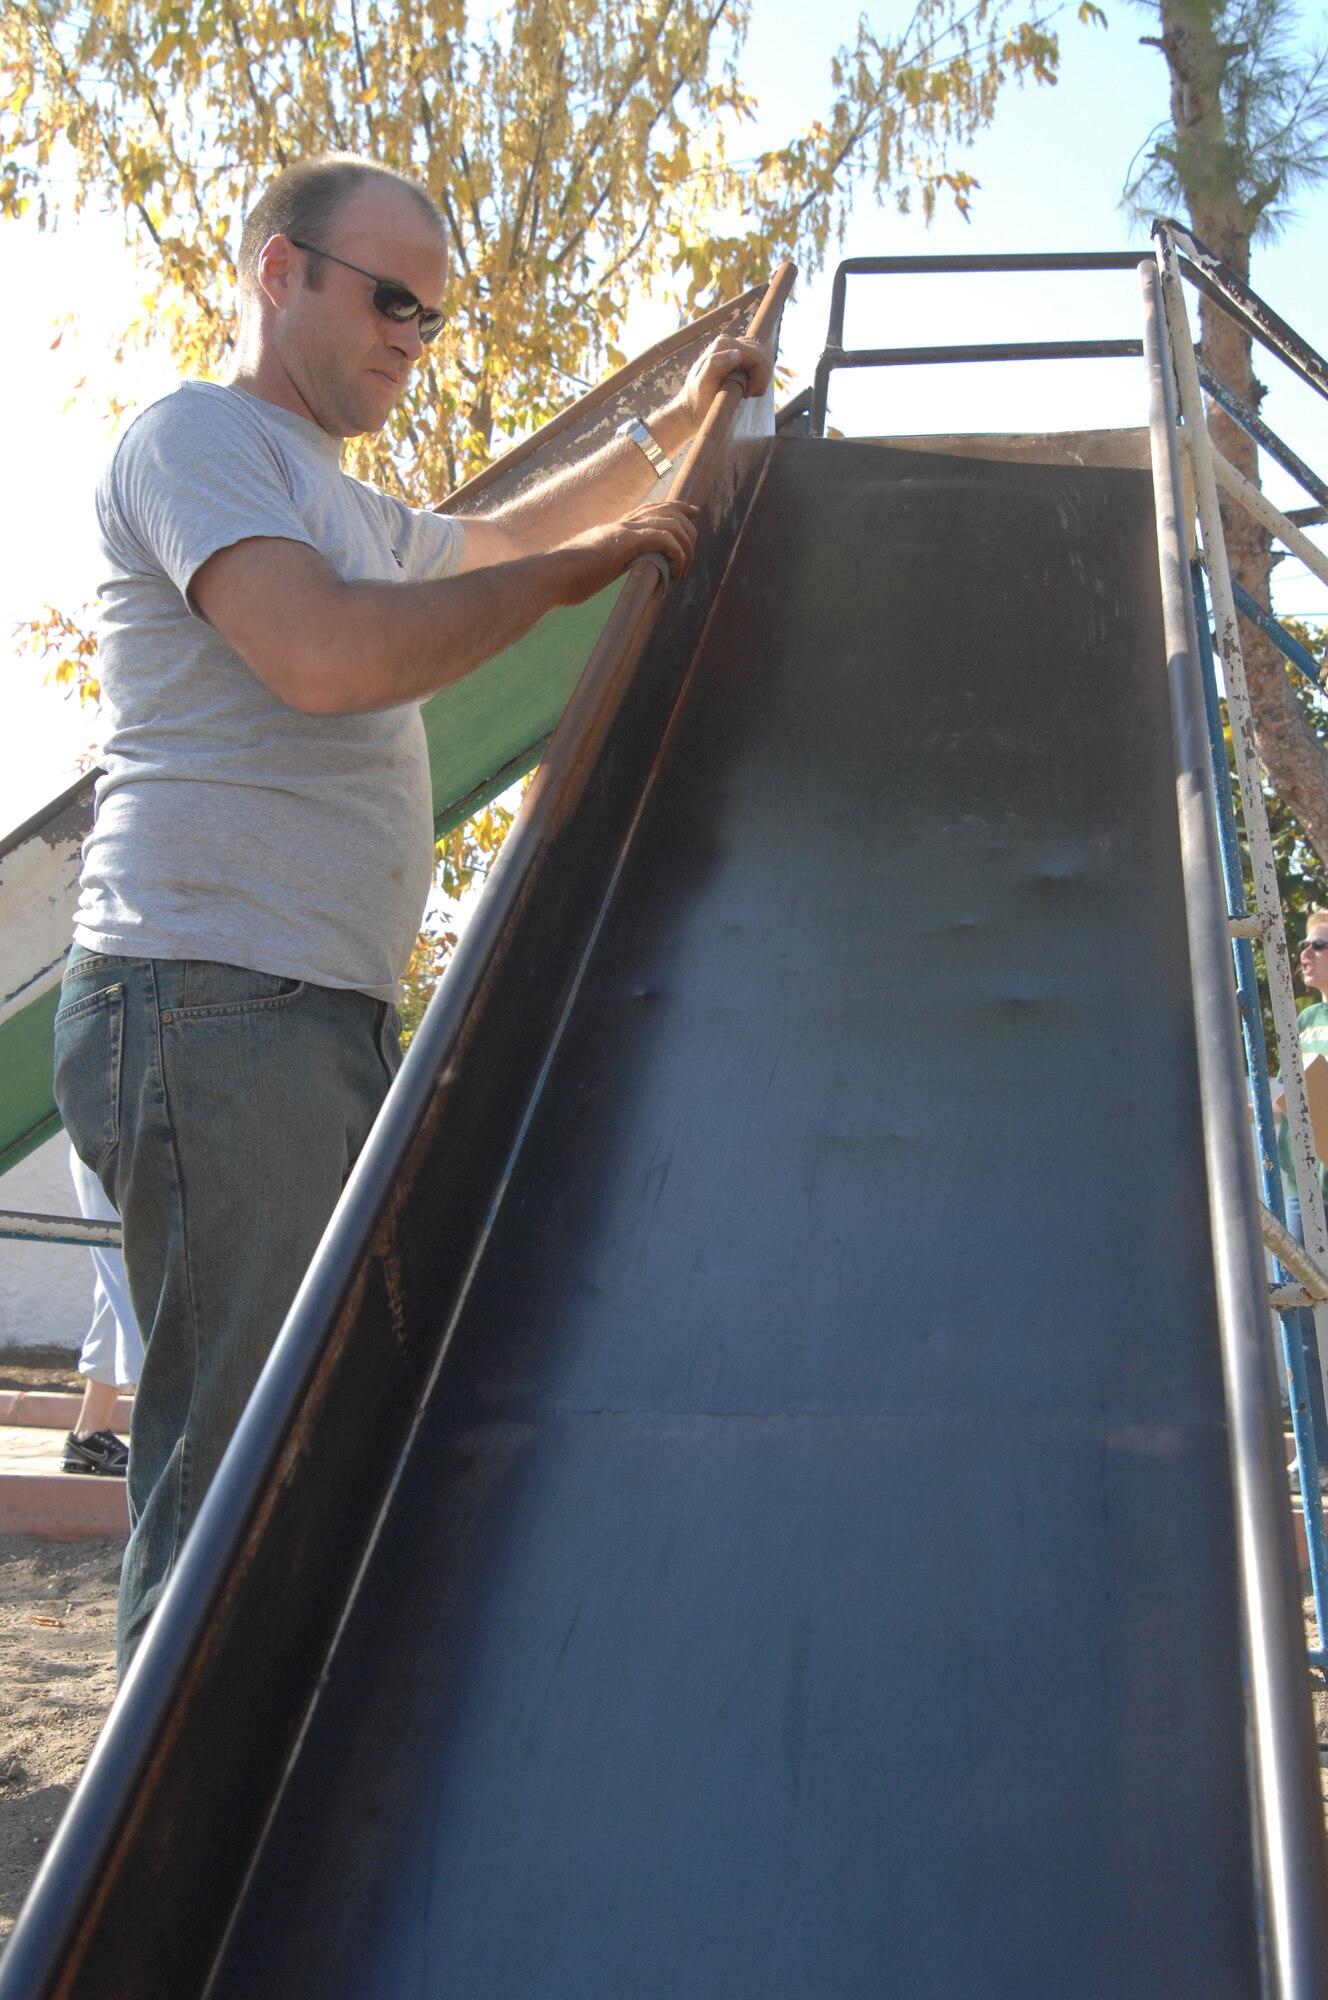 Staff Sgt. Christopher Self, 39th Logistics Readiness Squadron, sands rust off a slide at an Incirlik Village park, Nov 15. Sergeant Self was among the estimated 60 volunteers present who helped the Incirlik Air Base Chapel renovate the park in an effort to strengthen community relations. (U.S. Air Force photo by Senior Airman Benjamin Wilson)